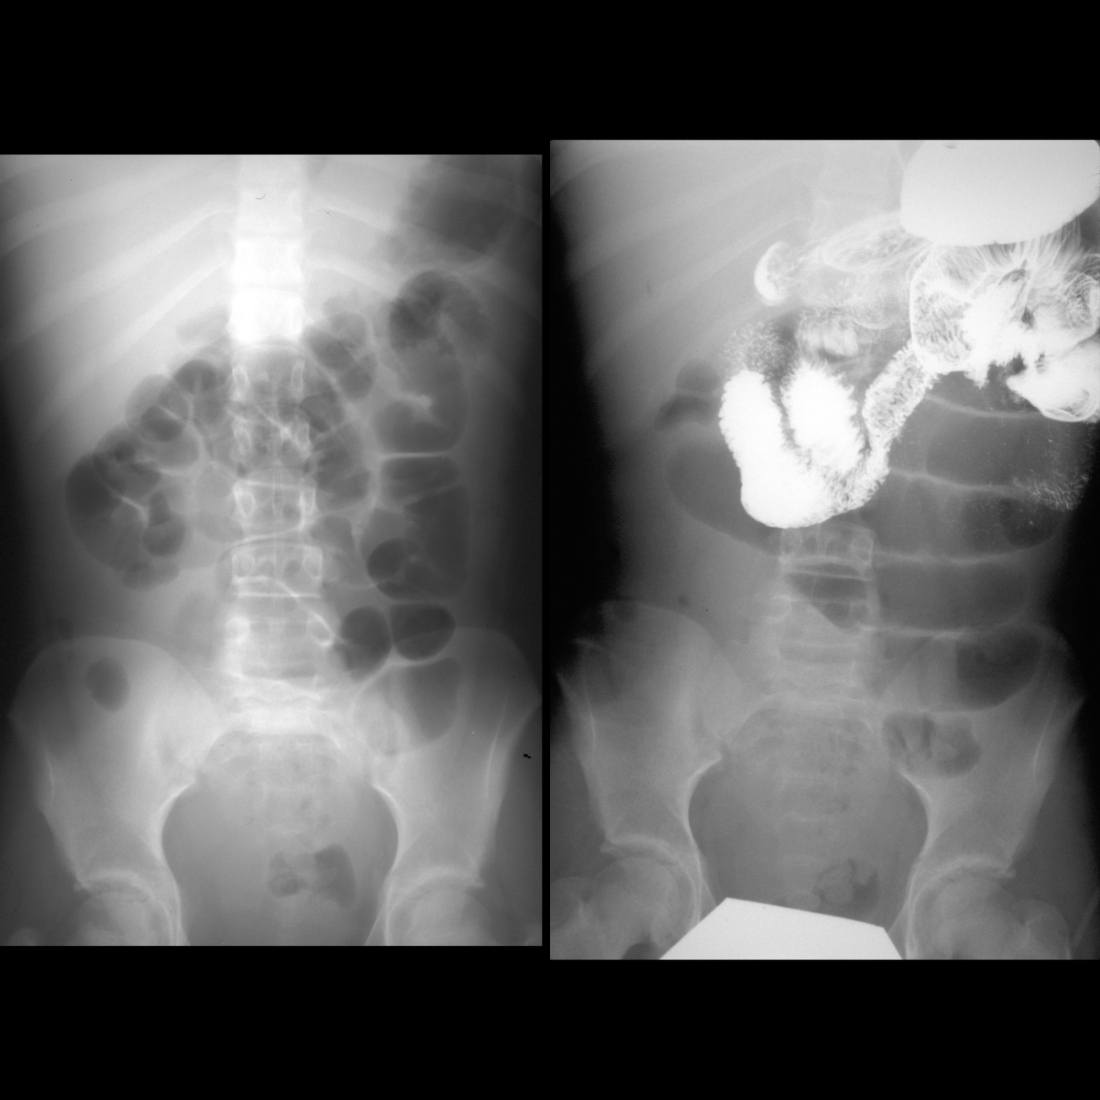 AXR and upper GI and small bowel followthrough of small bowel obstruction due to adhesions